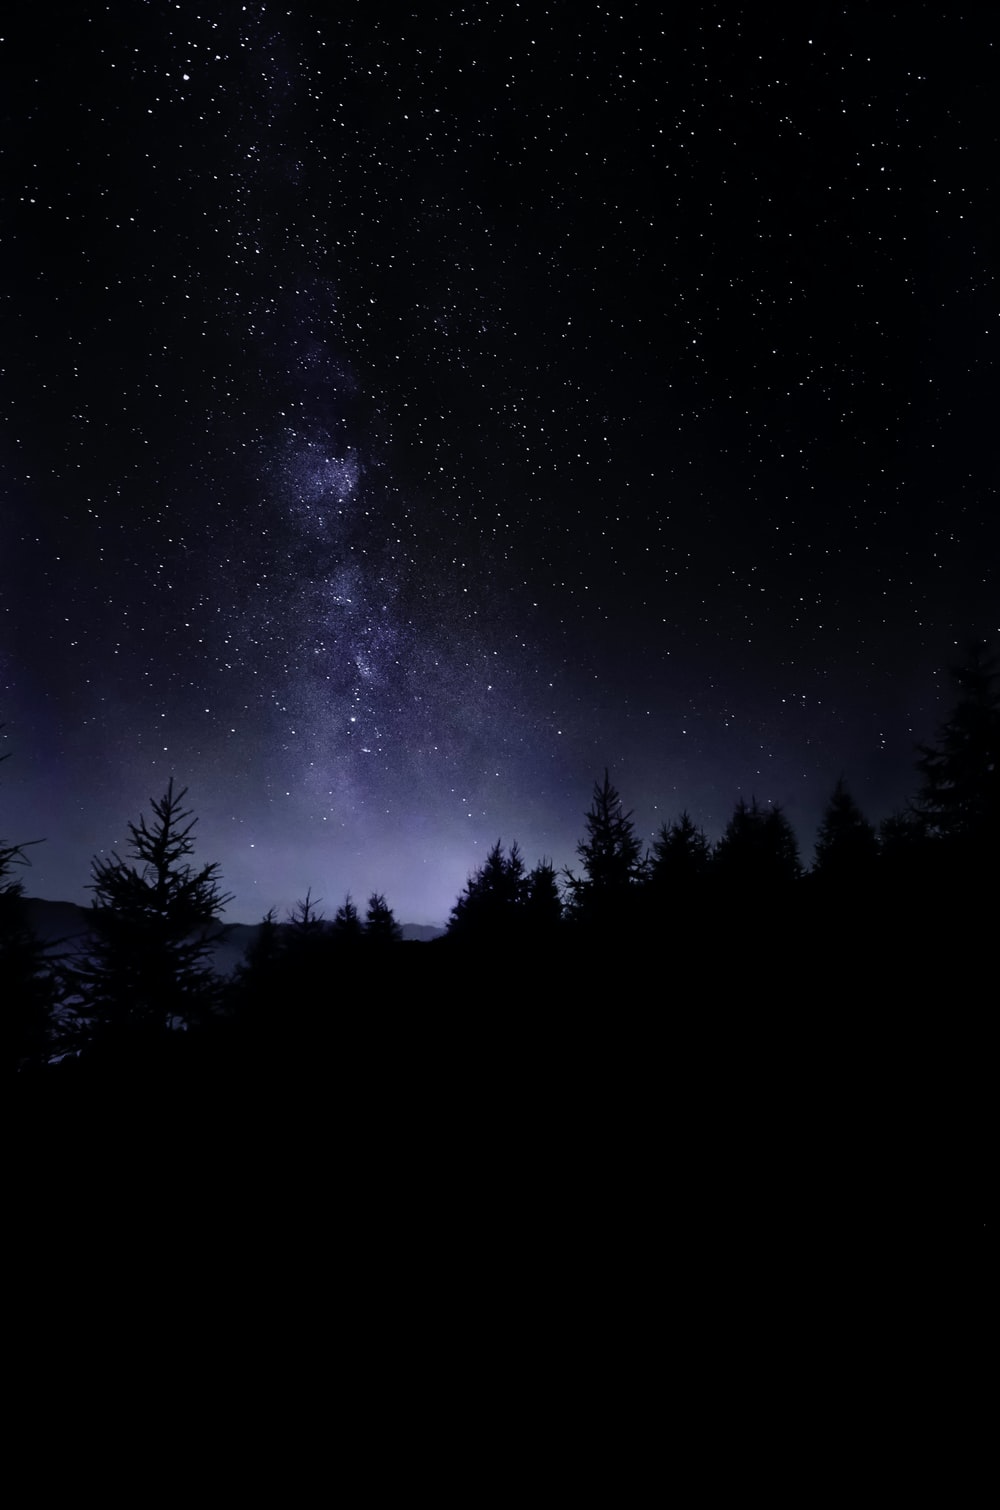 Stars At Night Picture. Download Free Image